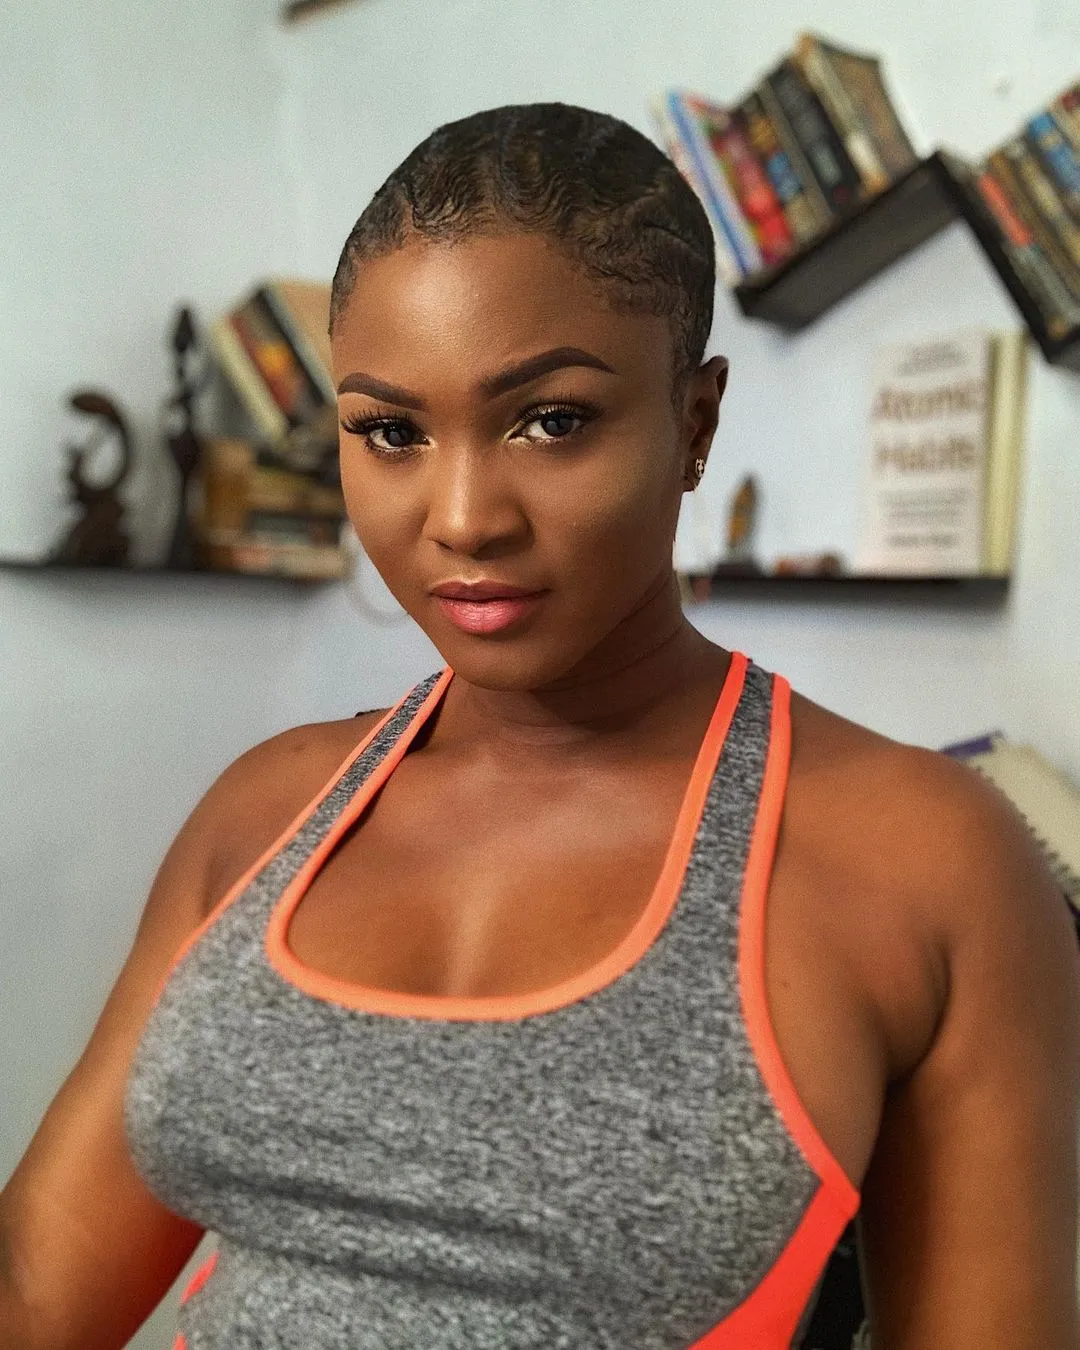 Eva Alordiah Calls Out Entitled Women - “If he has not married you, get a job”